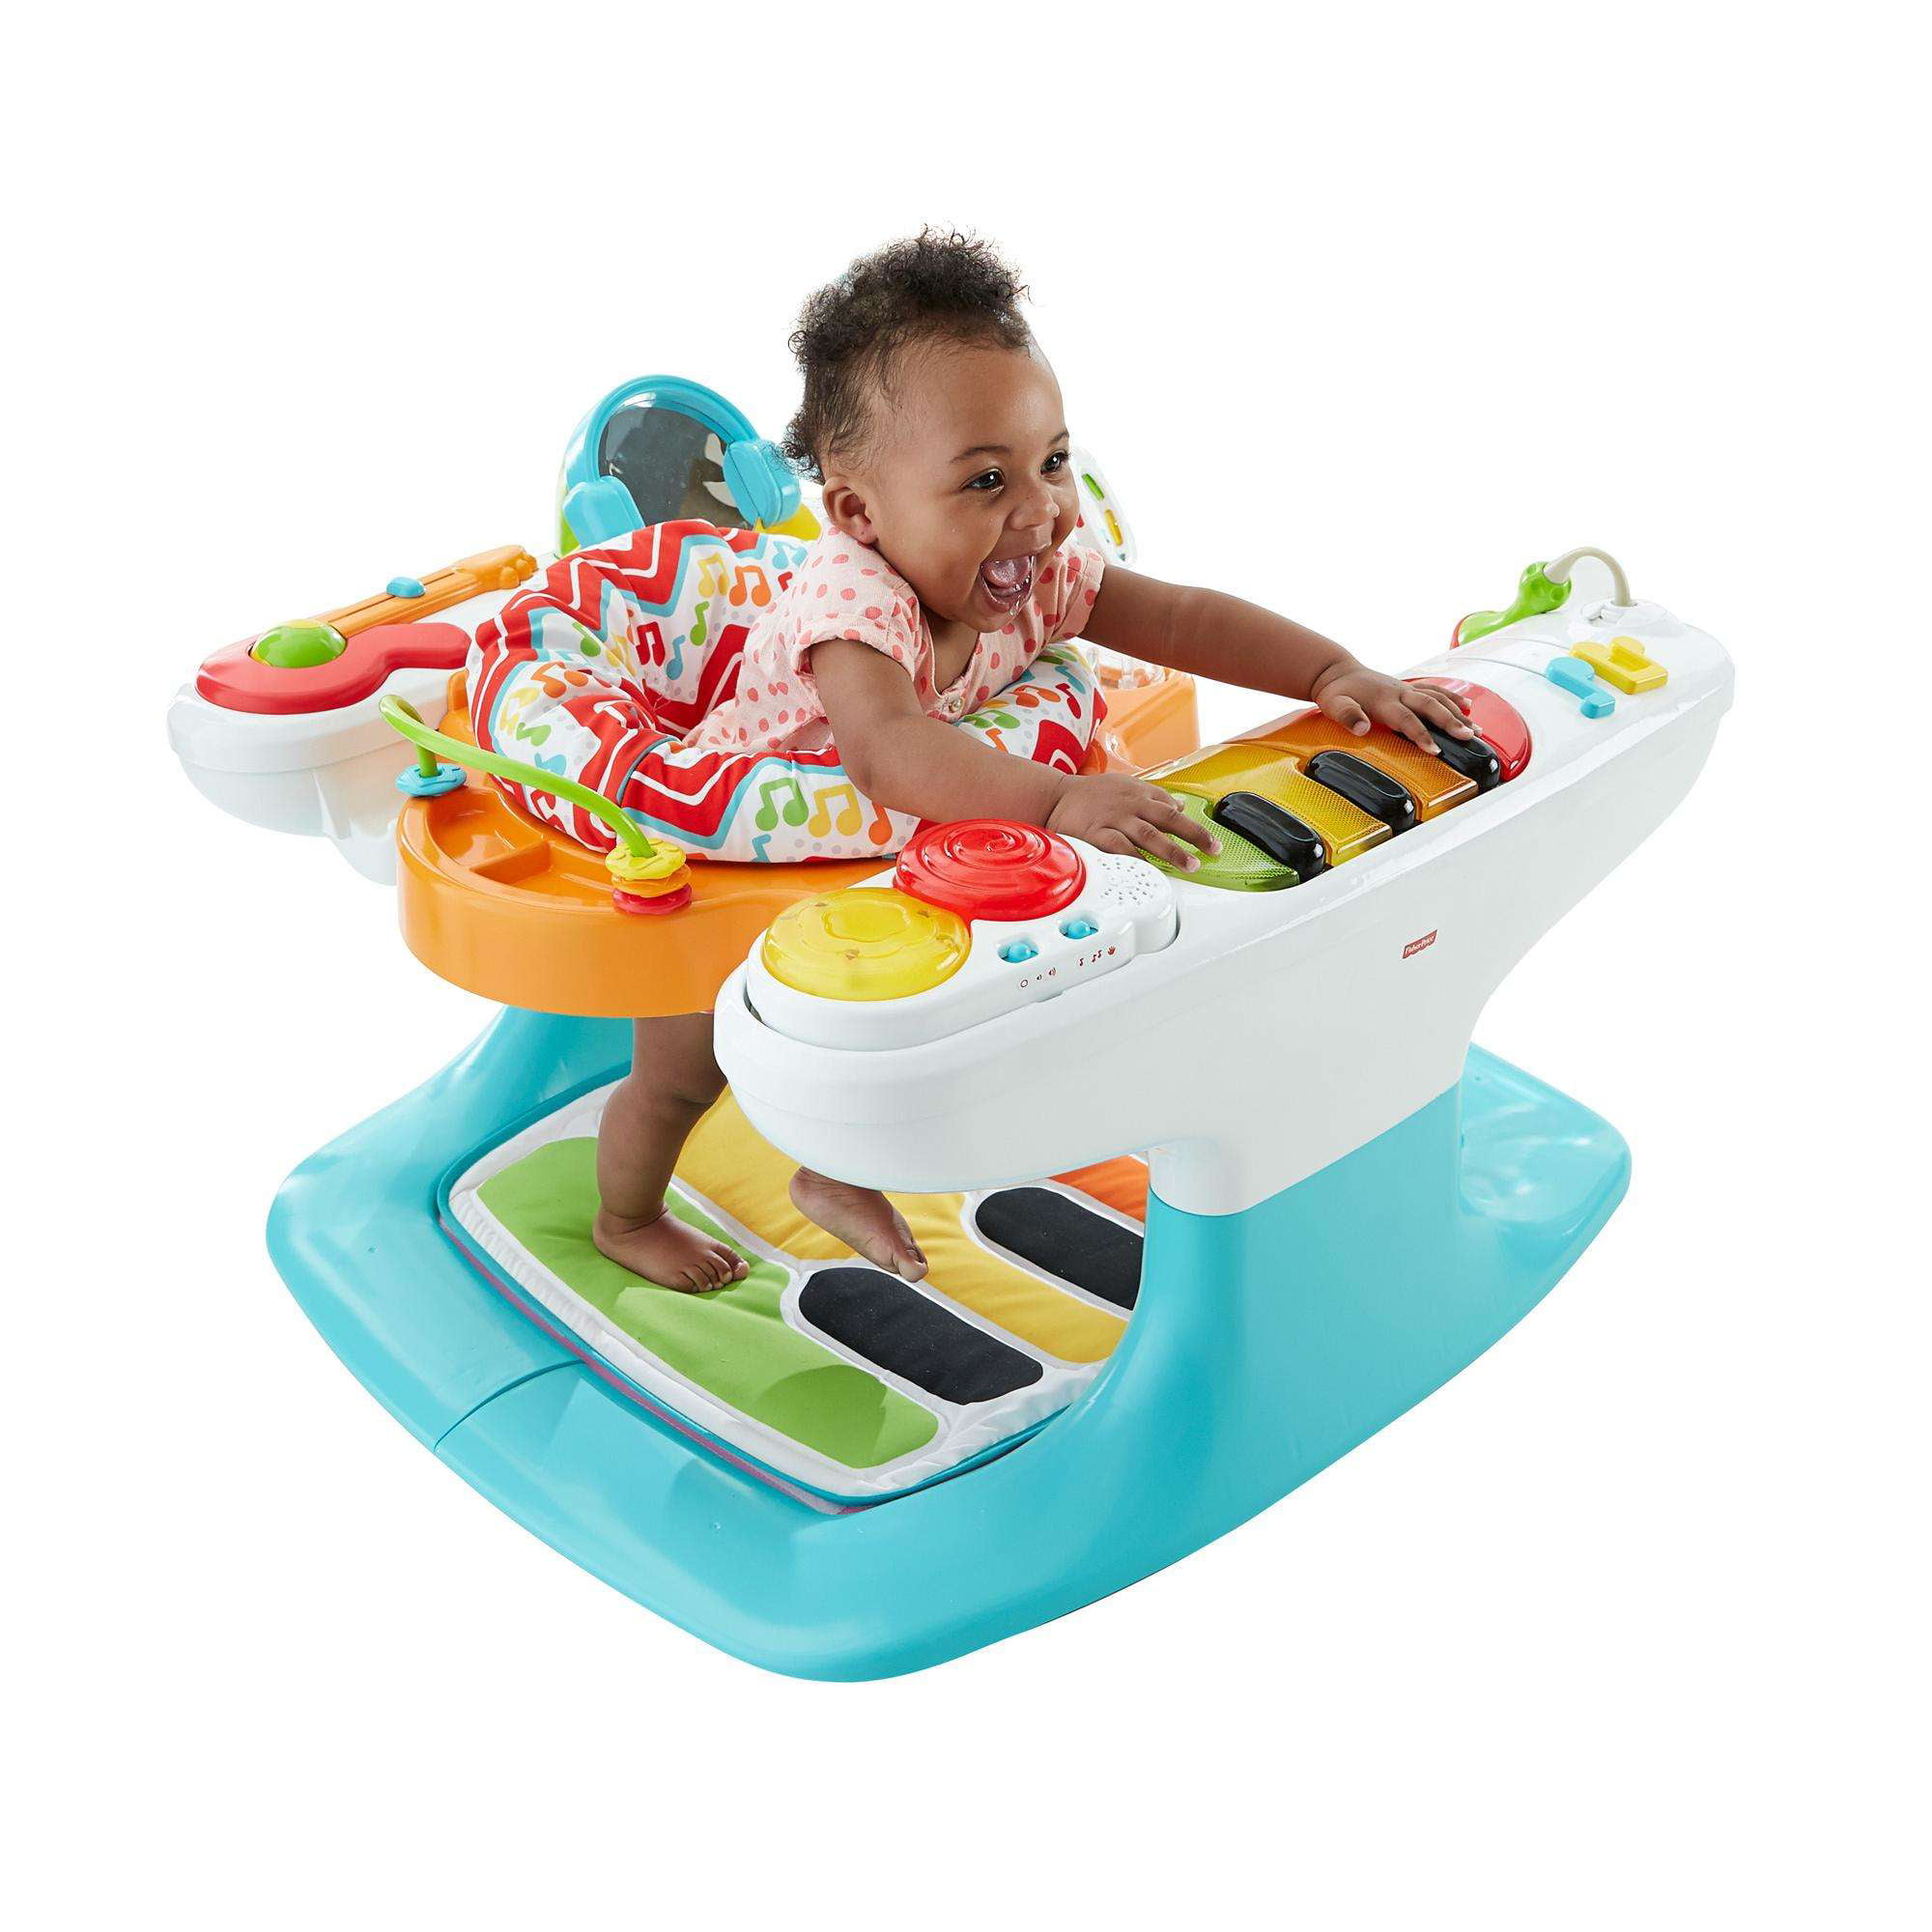 Piano enroulable Fisher-Price BendyBand, 3 ans et plus